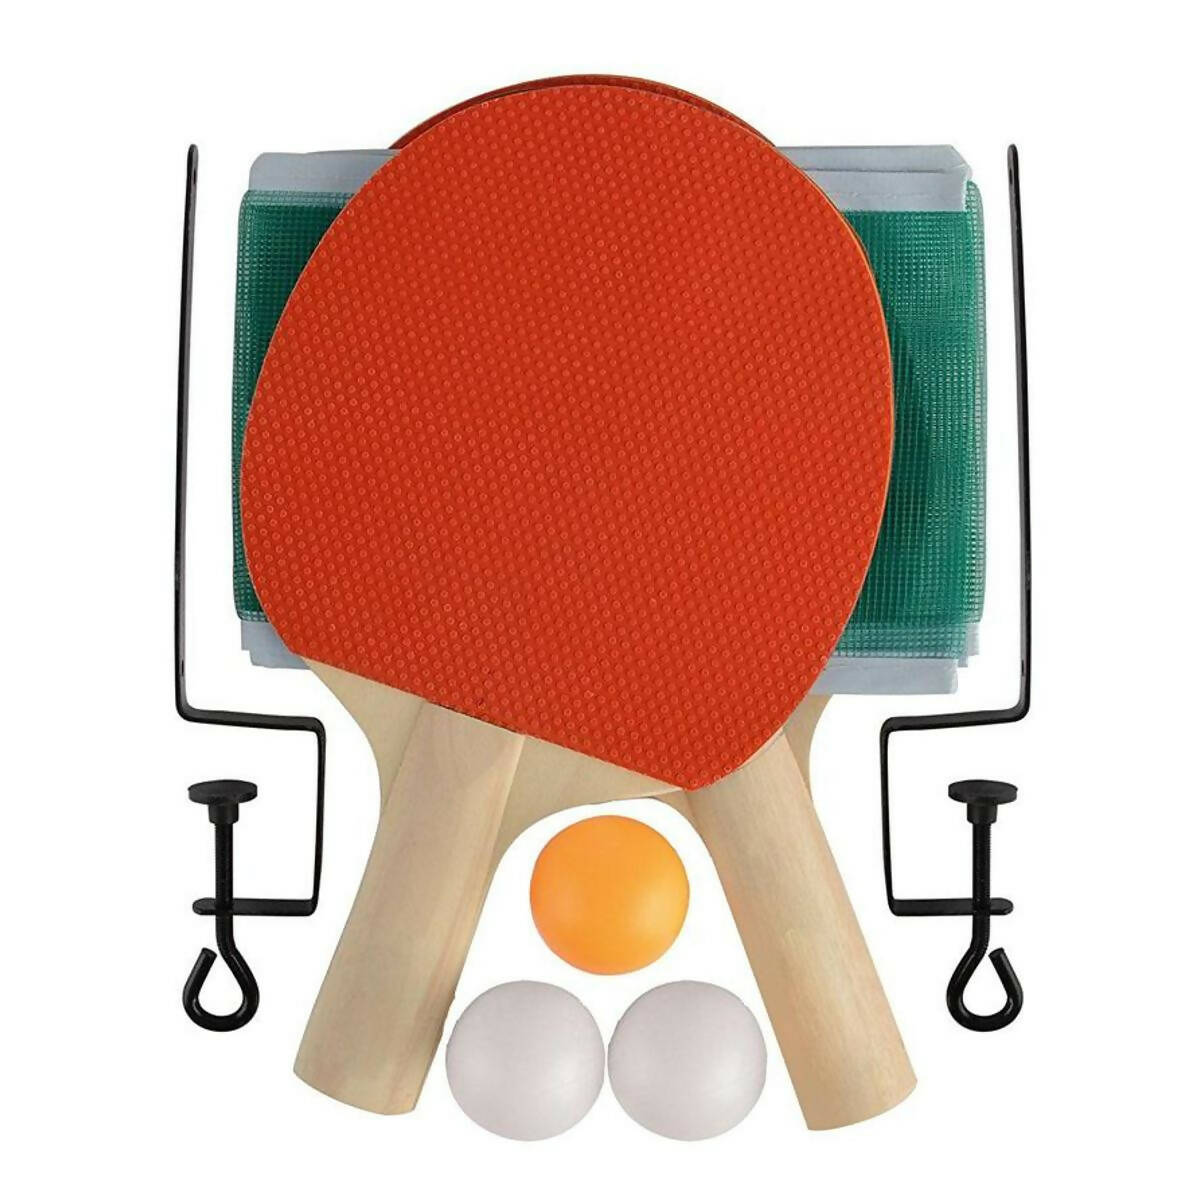 Ping Pong Table Tennis Racket Set With Net And Three Balls For Children, Kids